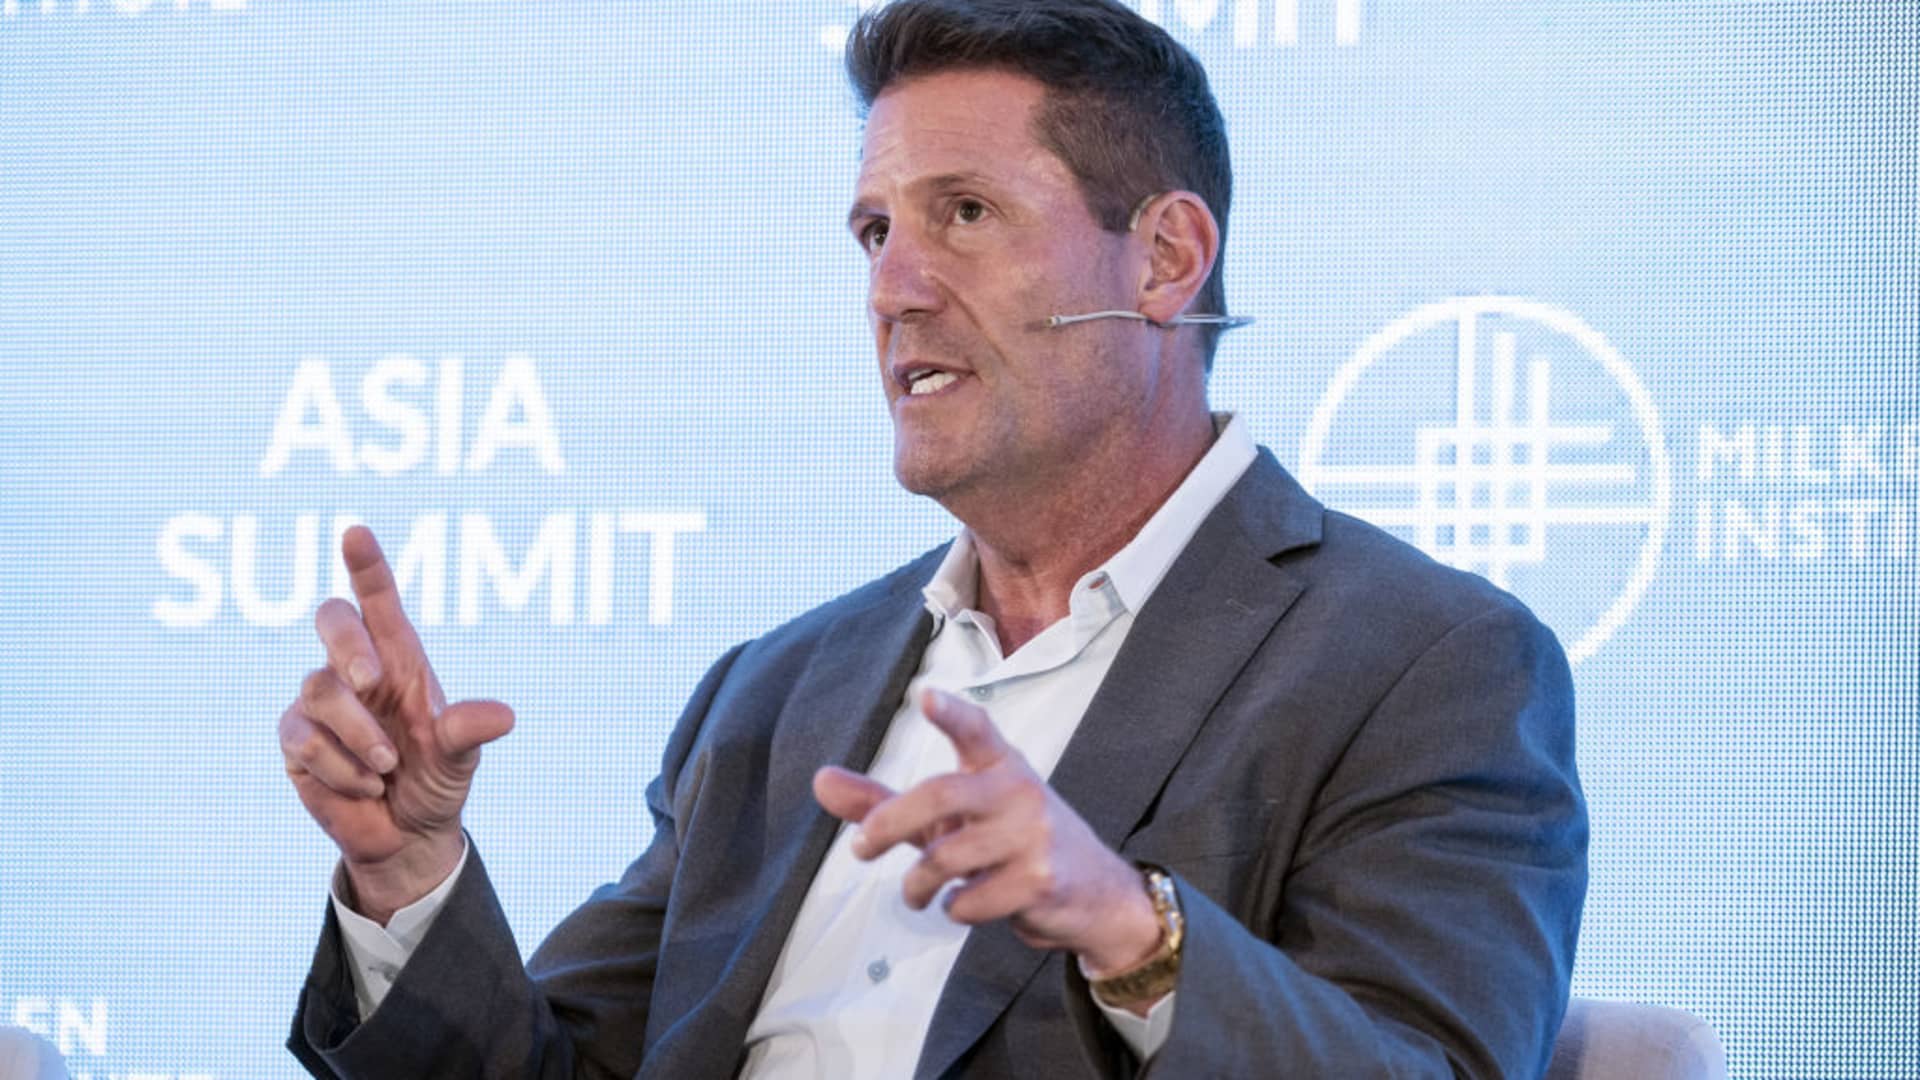 Kevin Mayer, co-founder and co-chief executive officer of Candle Media, chairman of DAZN Group, speaks at the Milken Institute Asia Summit in Singapore, on Thursday, Sept. 29, 2022.